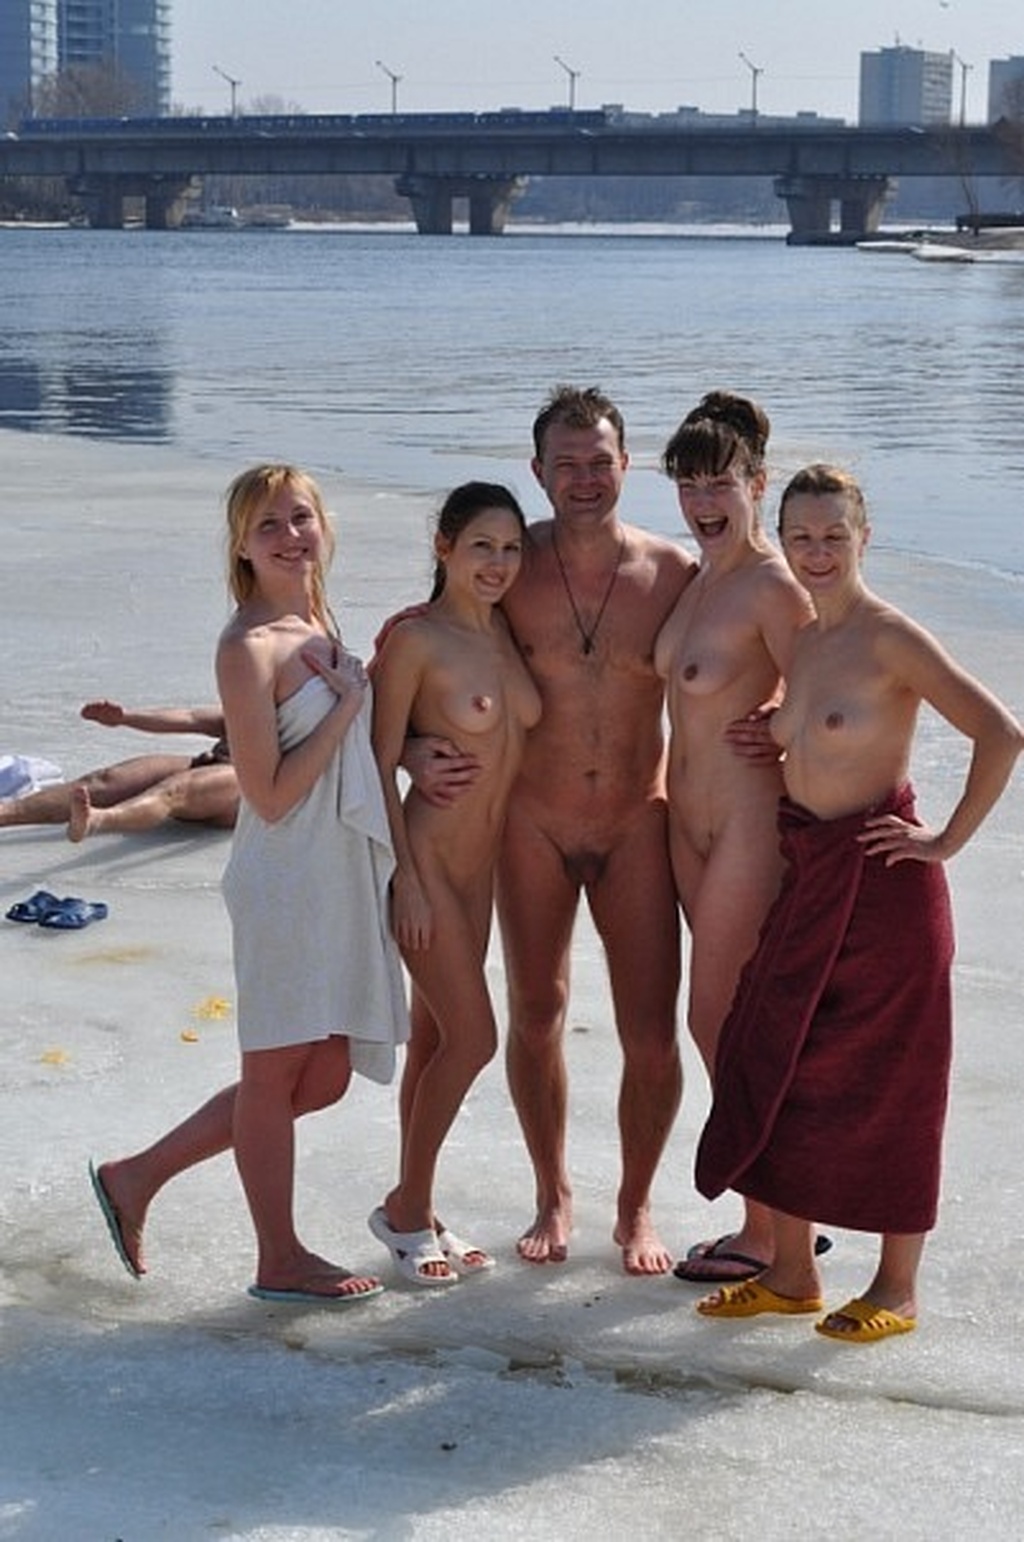 https://www.nudismlife.com/galleries/nudists_and_nude/socalyoungnaturist/socal_young_naturist_0454.jpg